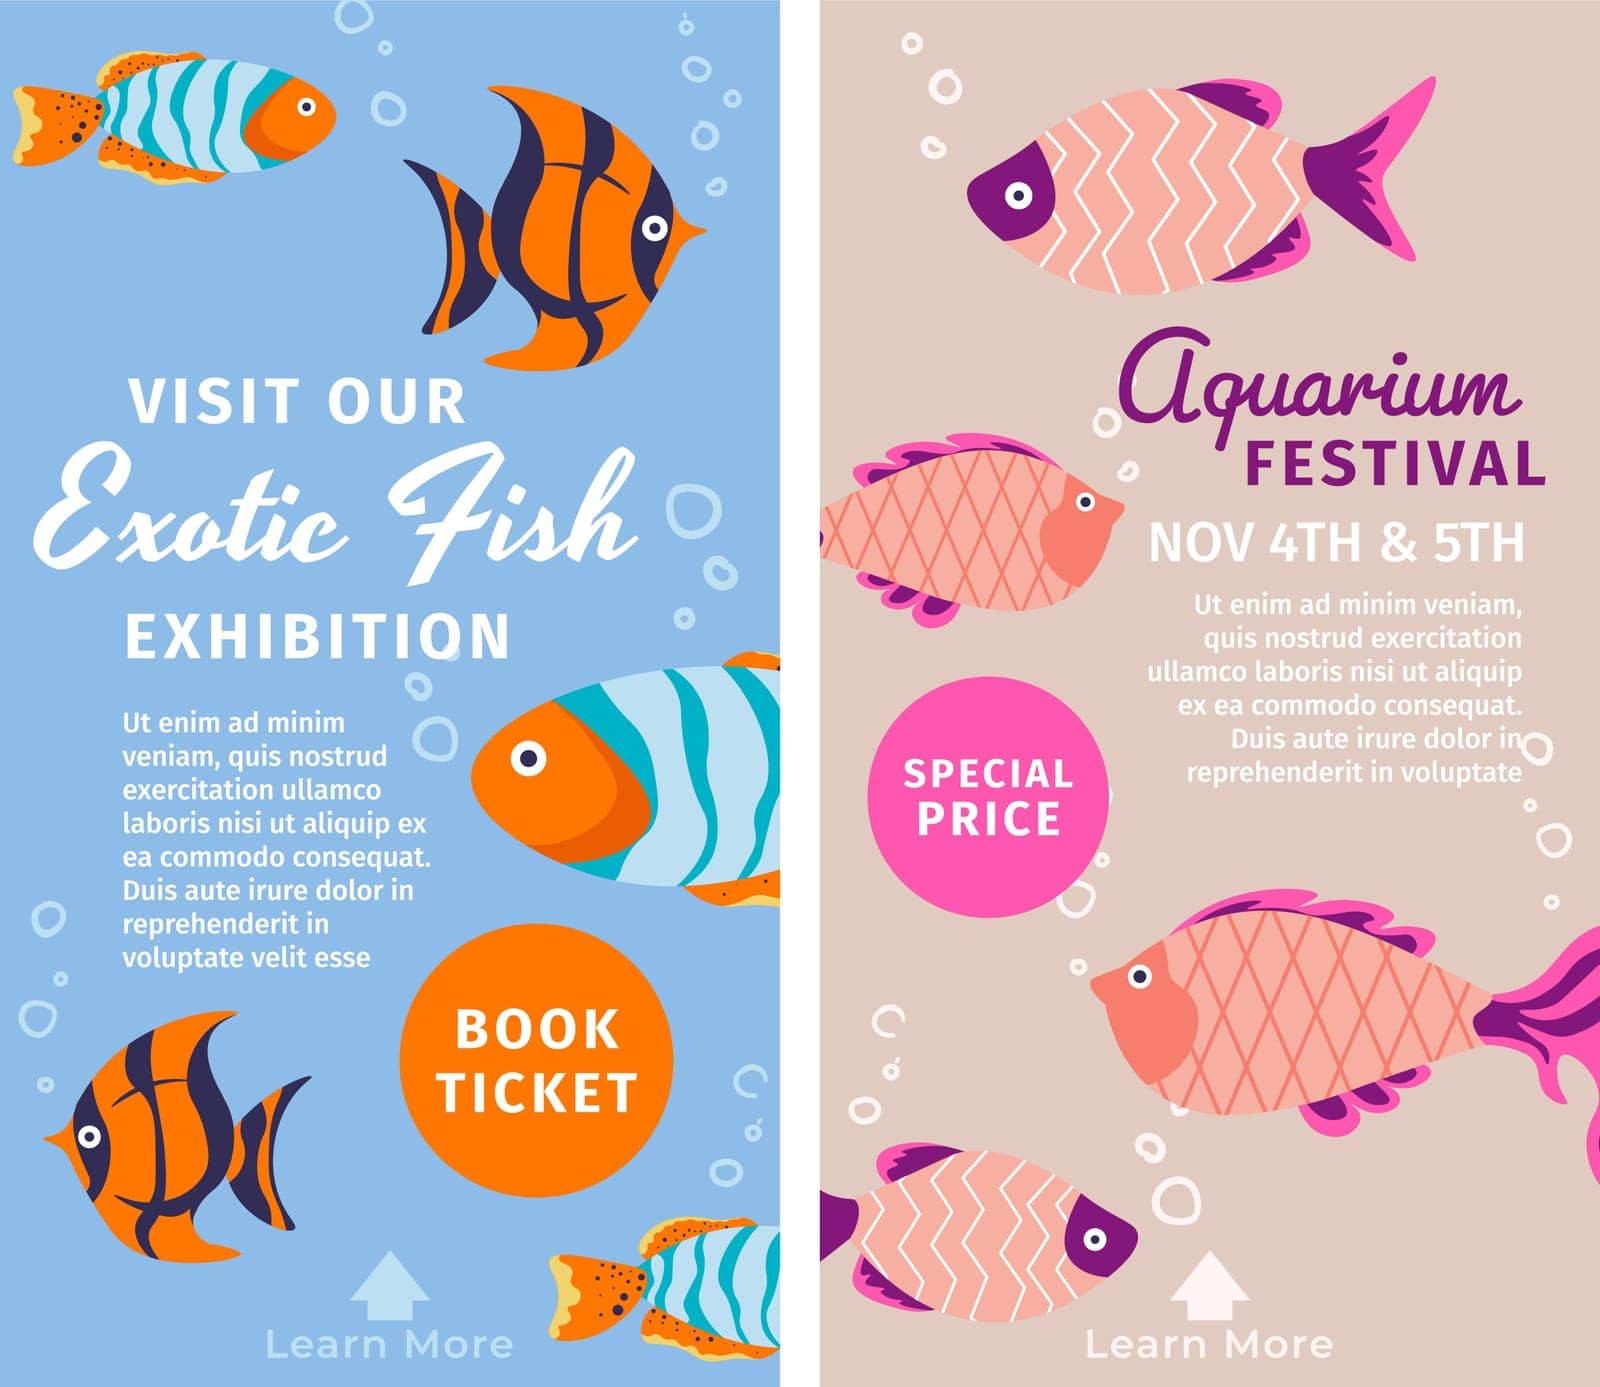 Festival aquariums. Order tickets at special price, and visit exhibition. Various types of reef and marine, freshwater exotic fish species. Promotional banner or advertisement, vector in flat style